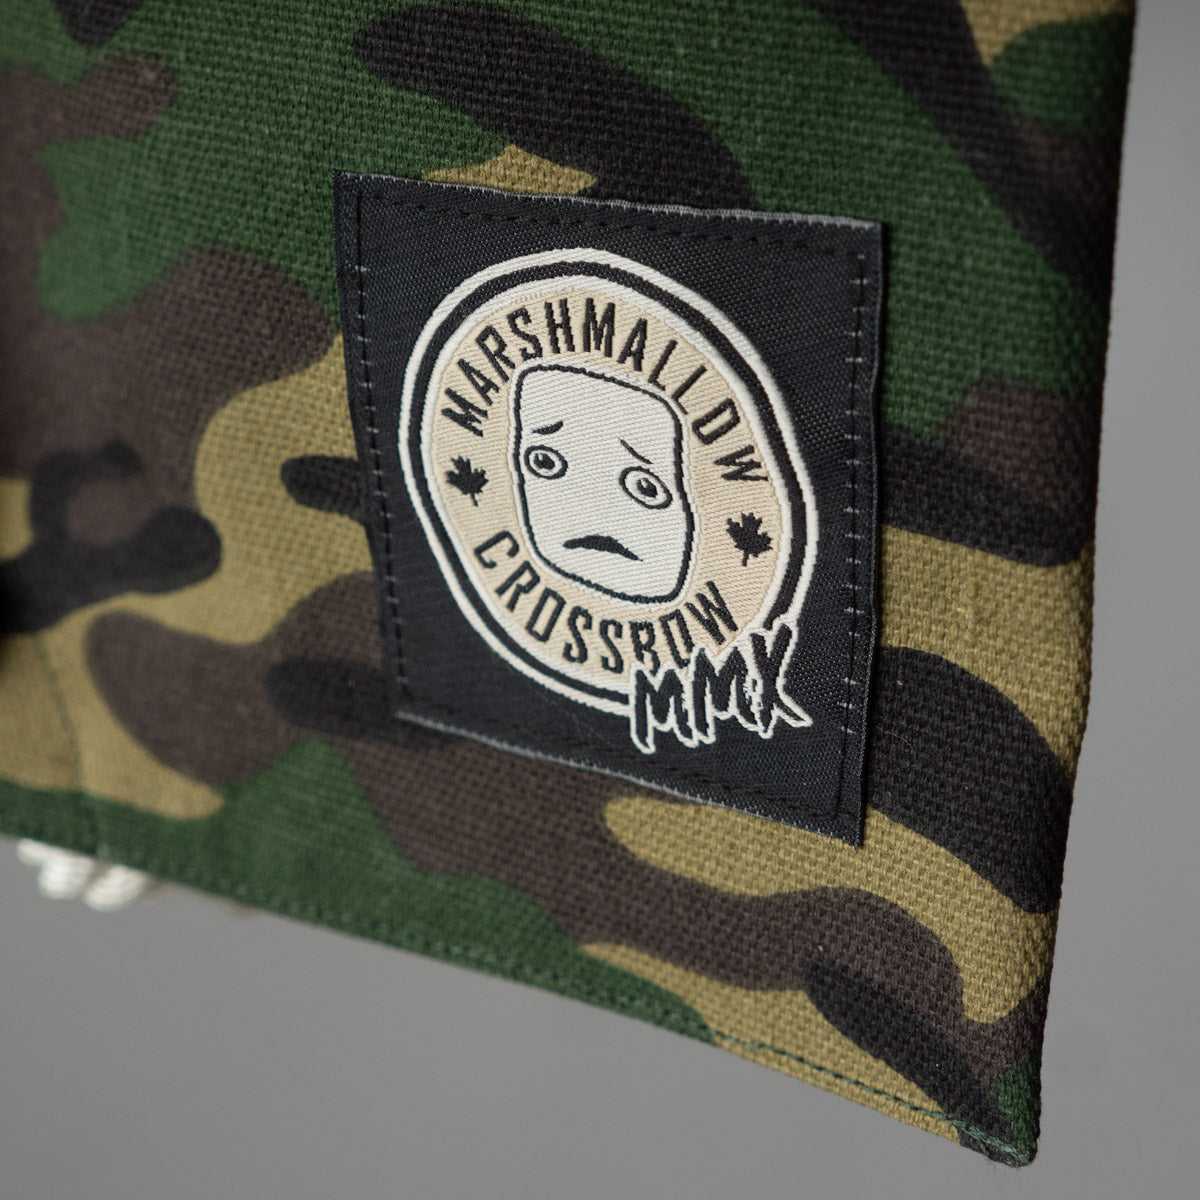 Embroidered MMX Marshmallow Crossbow logo on our Camo Carry Bag